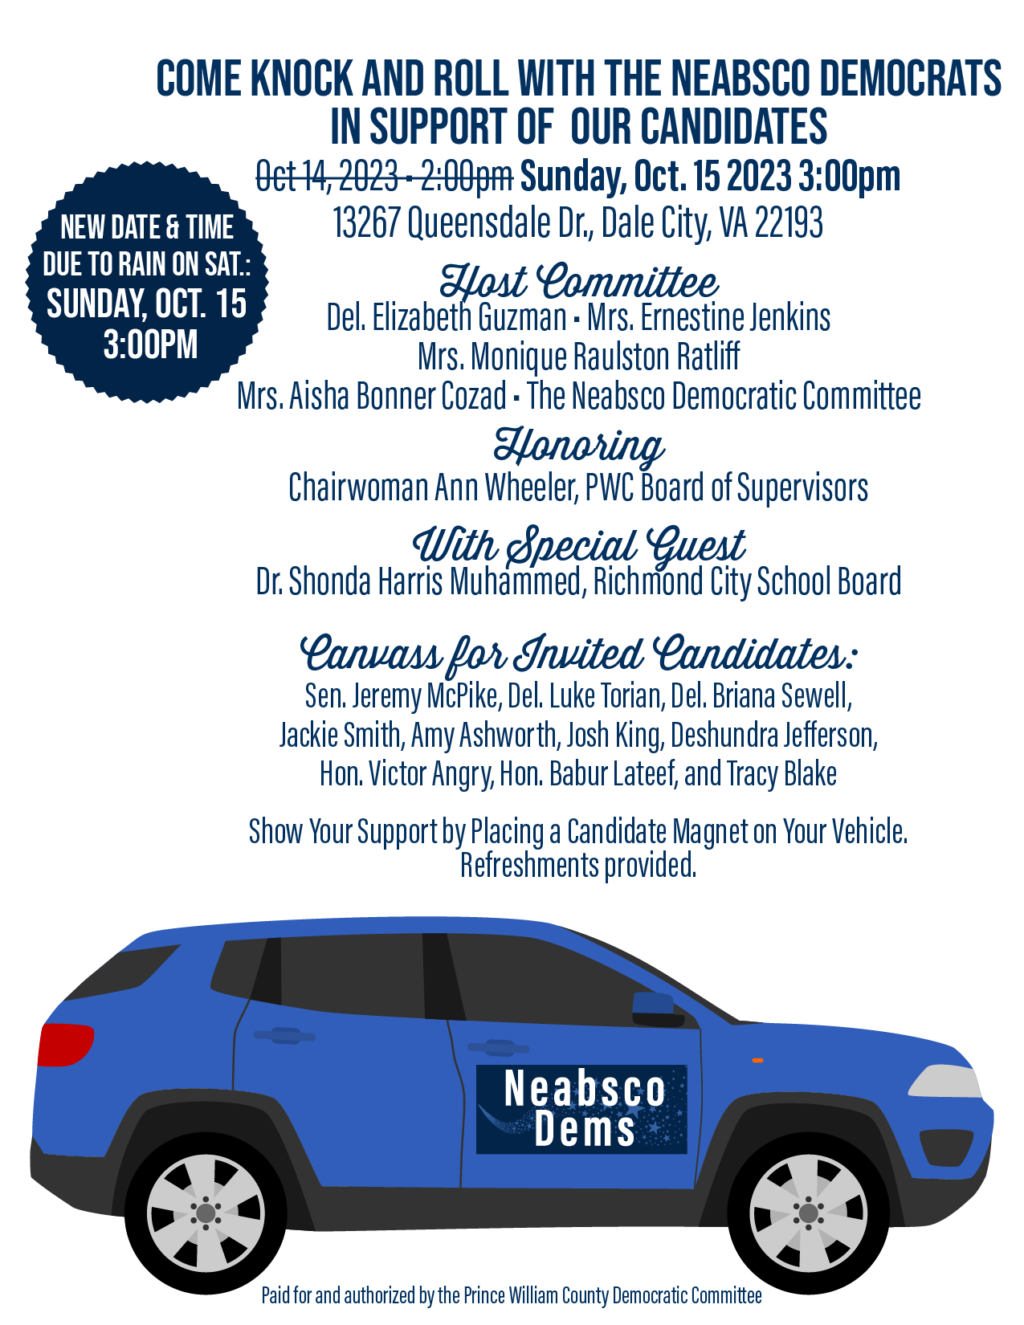 Neabsco Democrats Come Knock and Roll Event Update